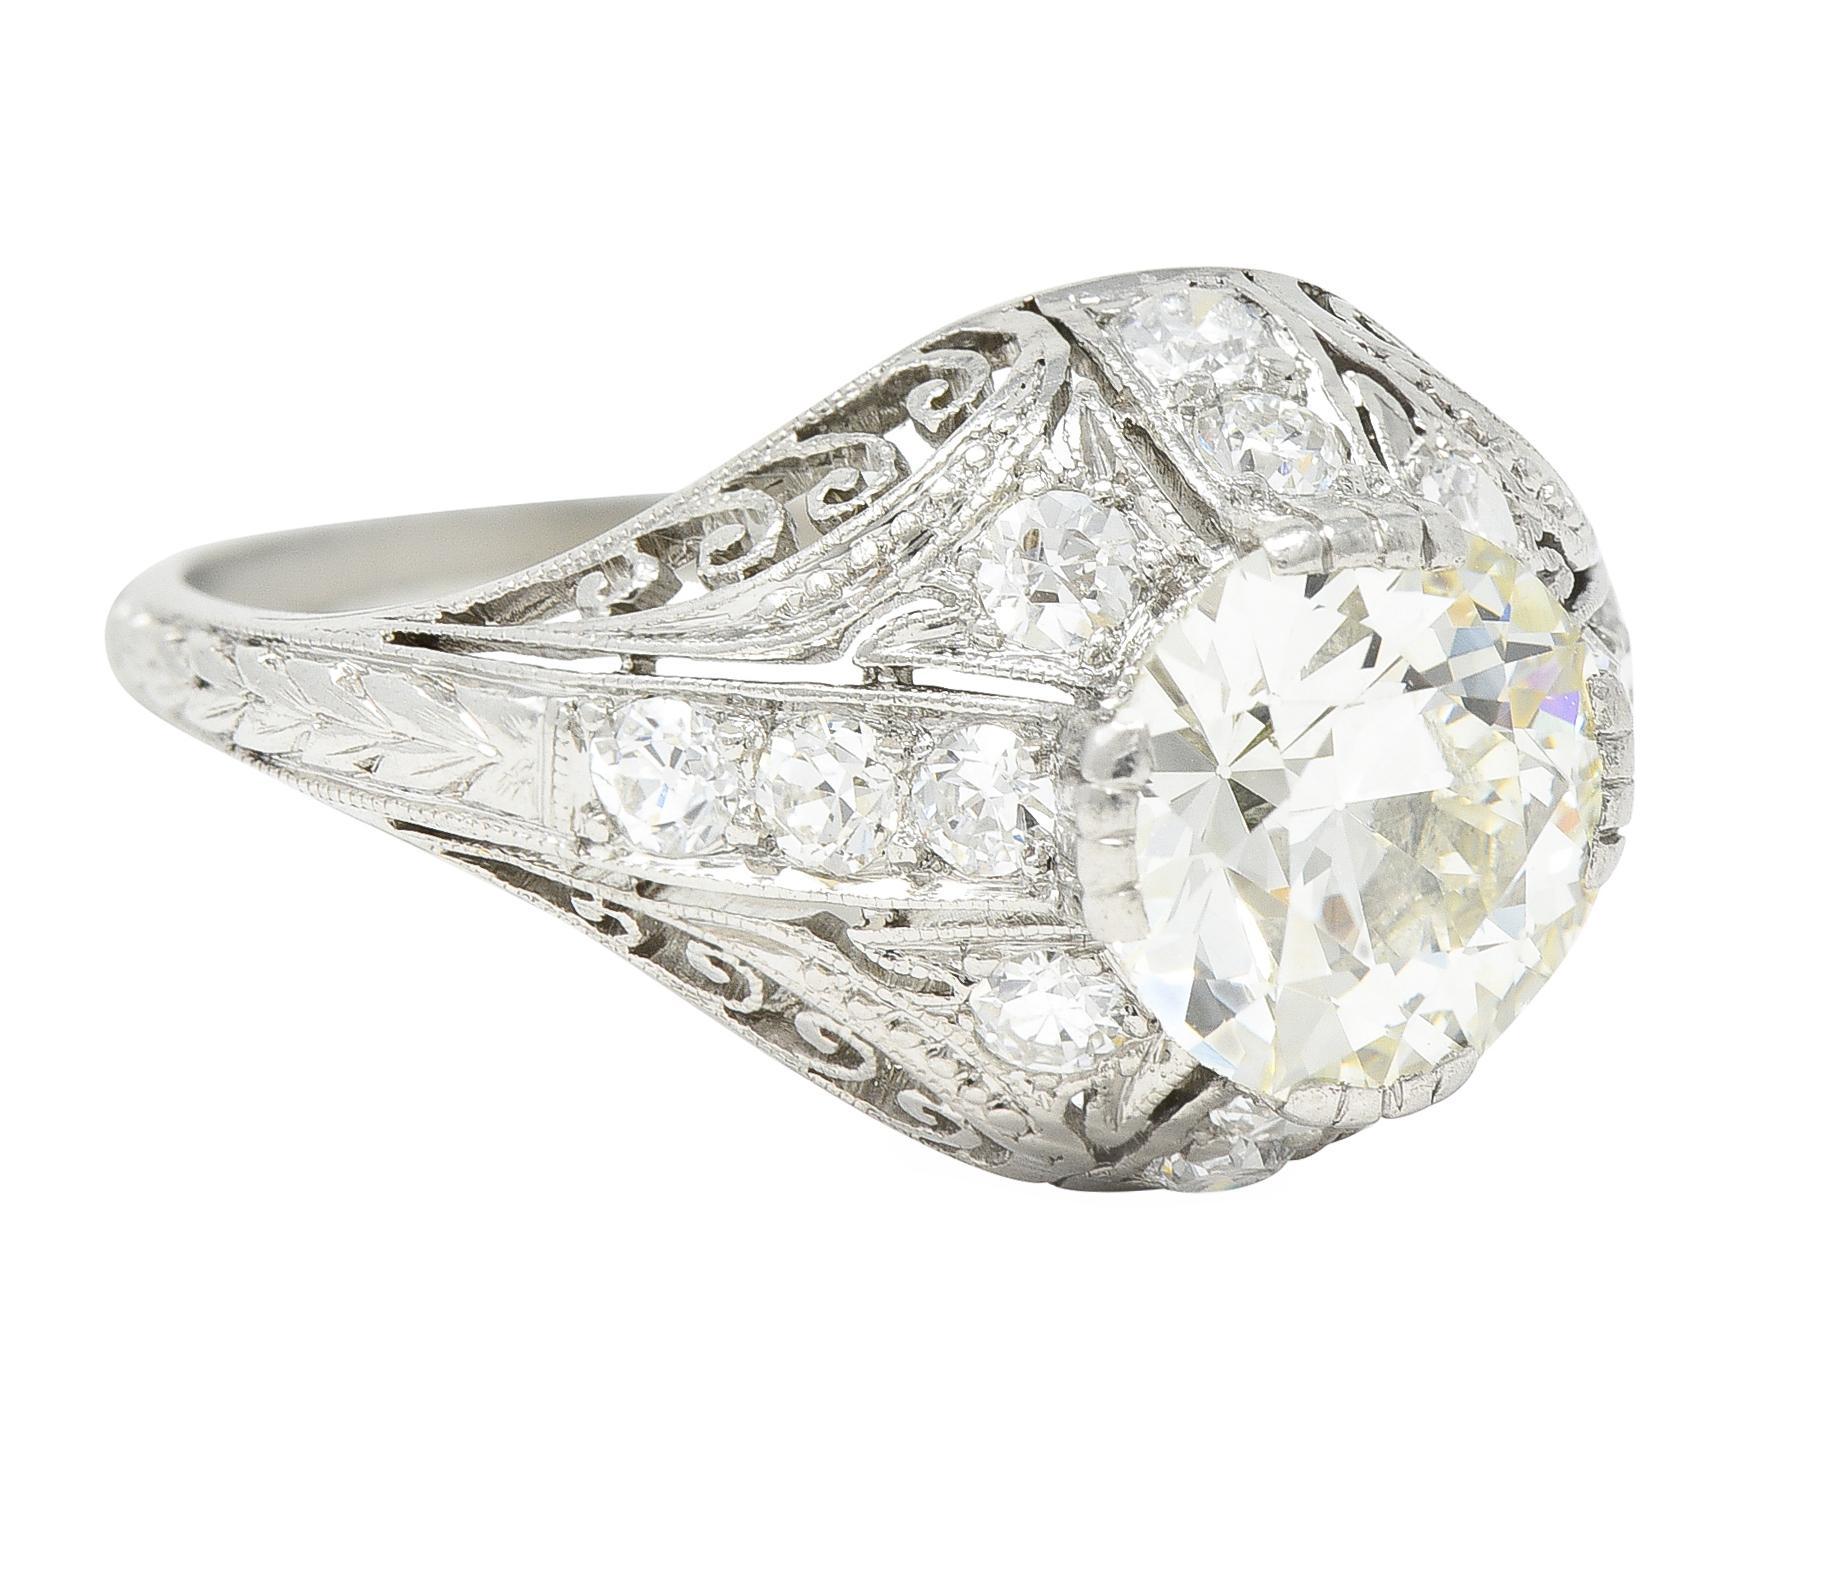 Edwardian 1.77 CTW Old European Cut Diamond Platinum Bombay Engagement Ring In Excellent Condition For Sale In Philadelphia, PA